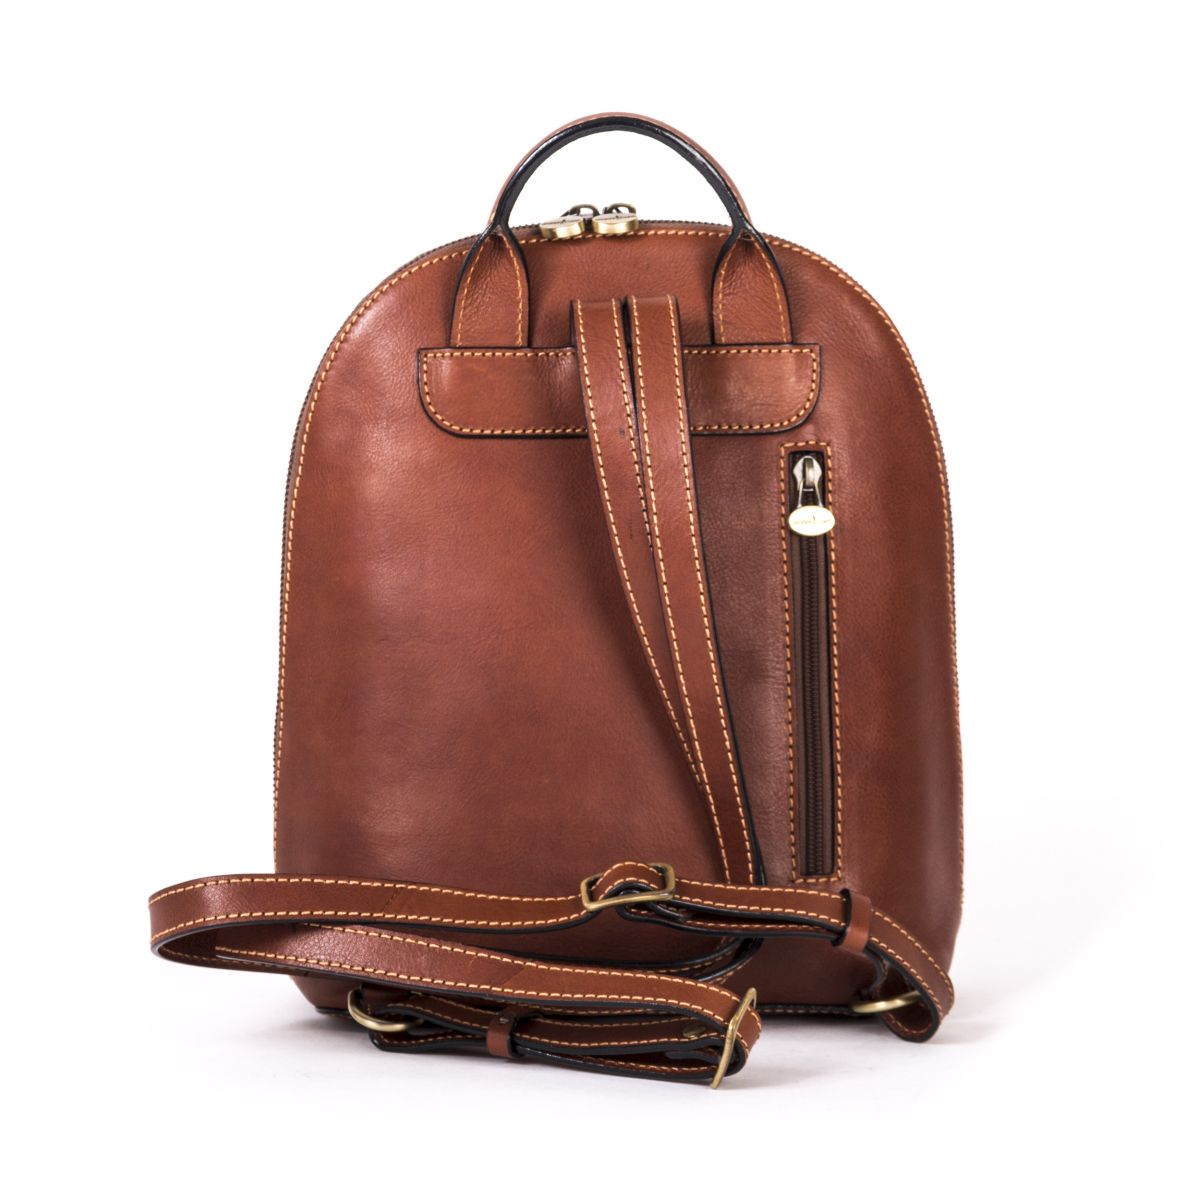 Gianni Conti Cognac Dino Leather Backpack